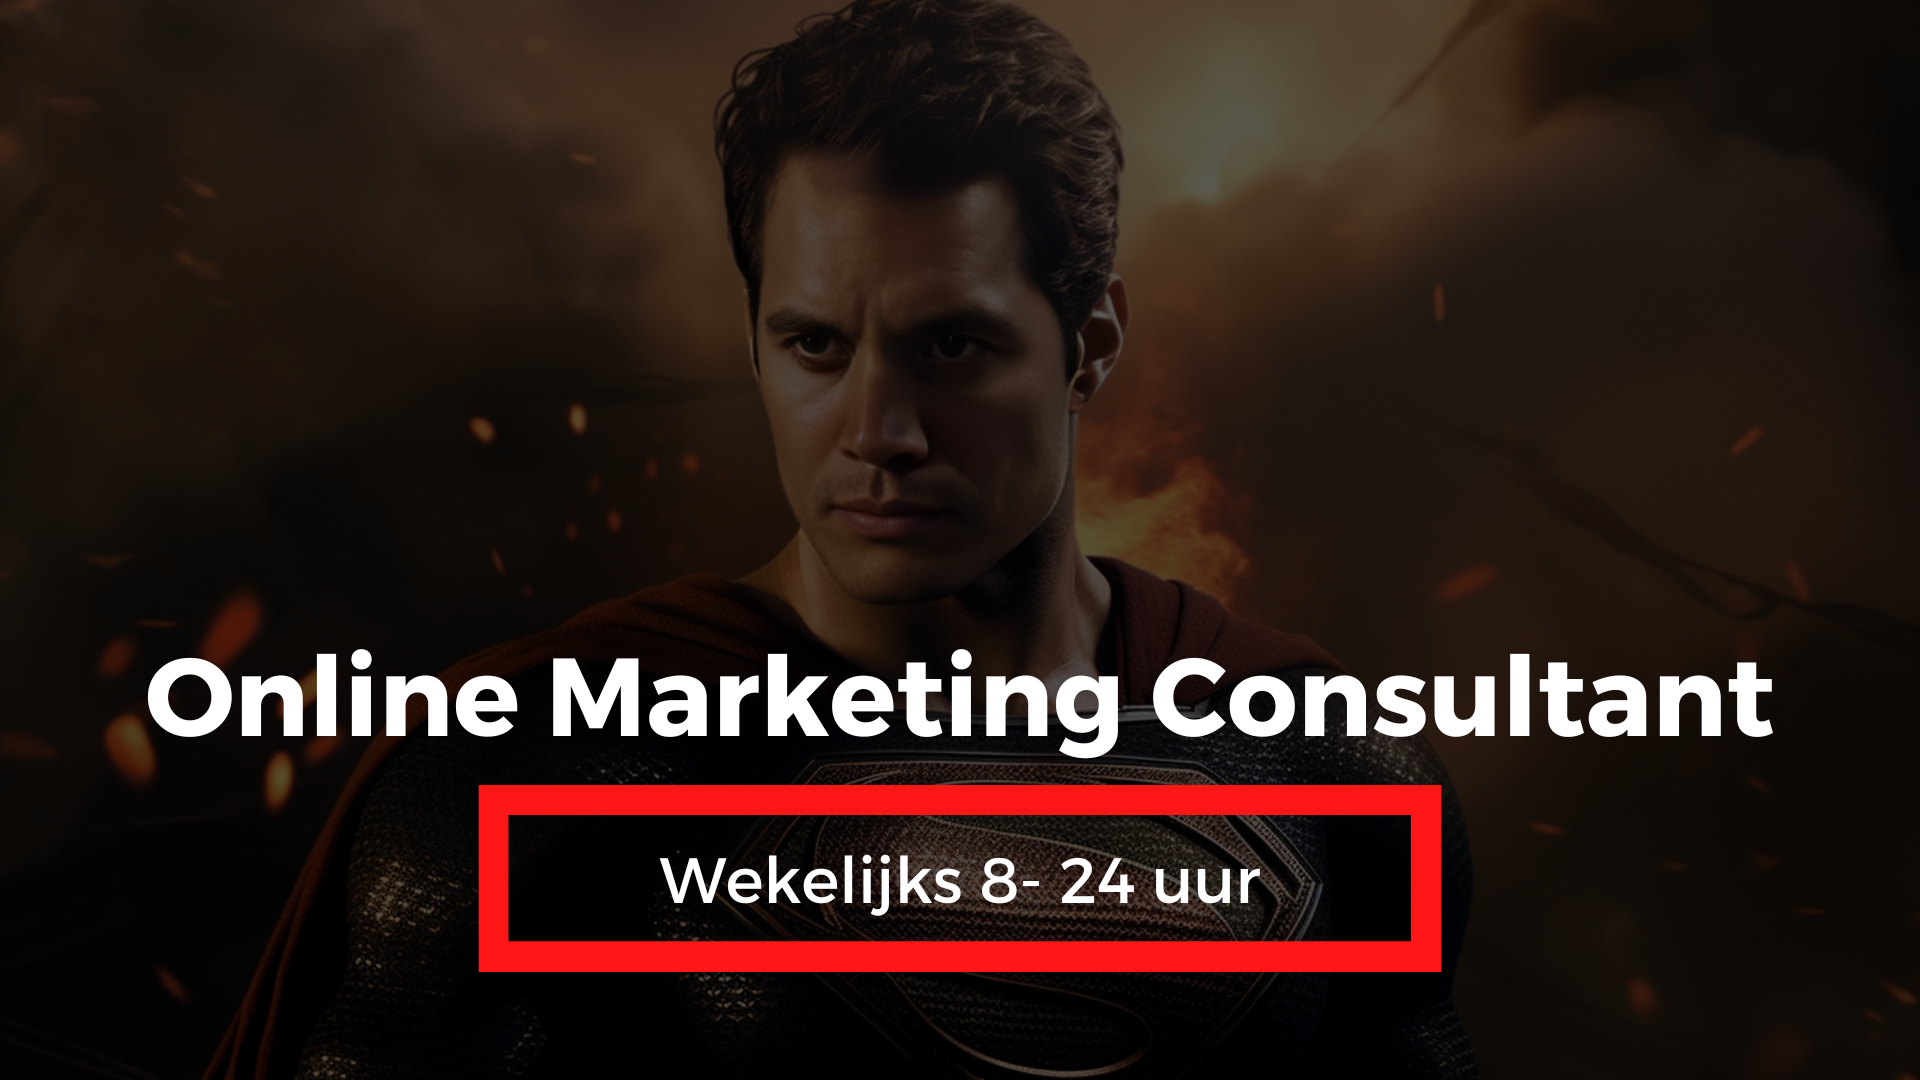 Lars de Rooy - Online Marketing Consultant